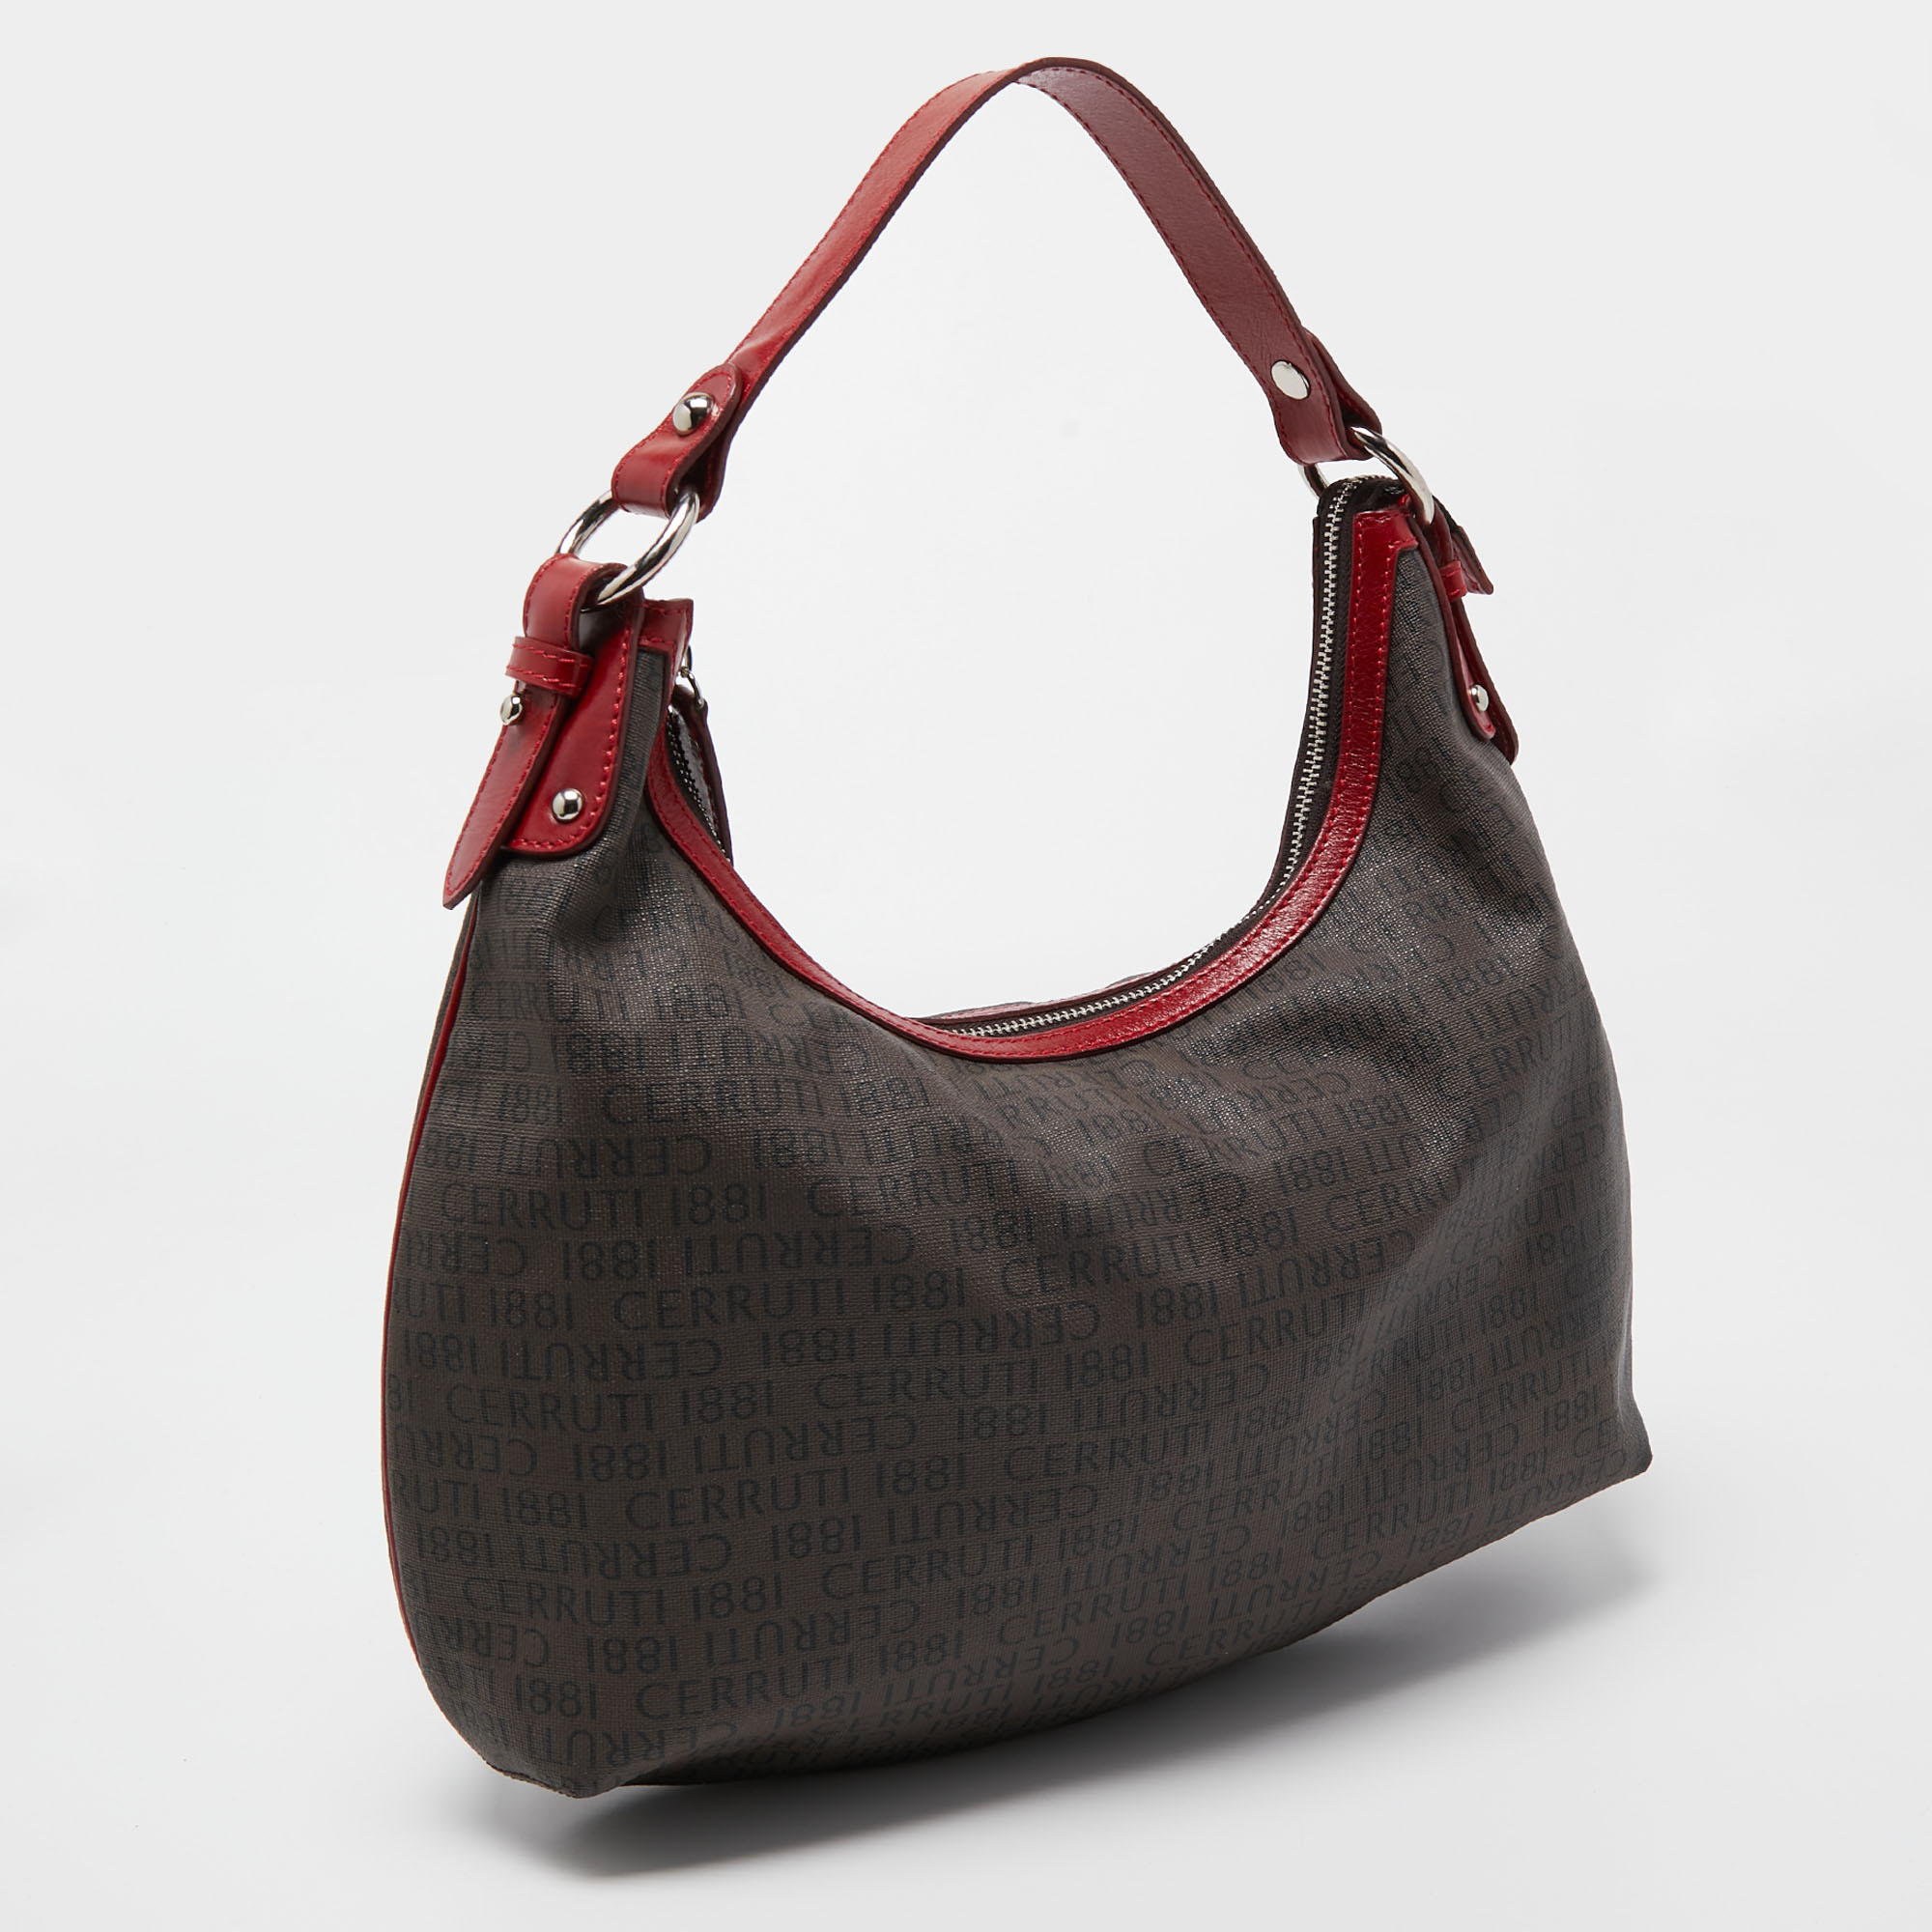 Cerruti Dark Brown/Red Monogram Coated Canvas And Leather Hobo